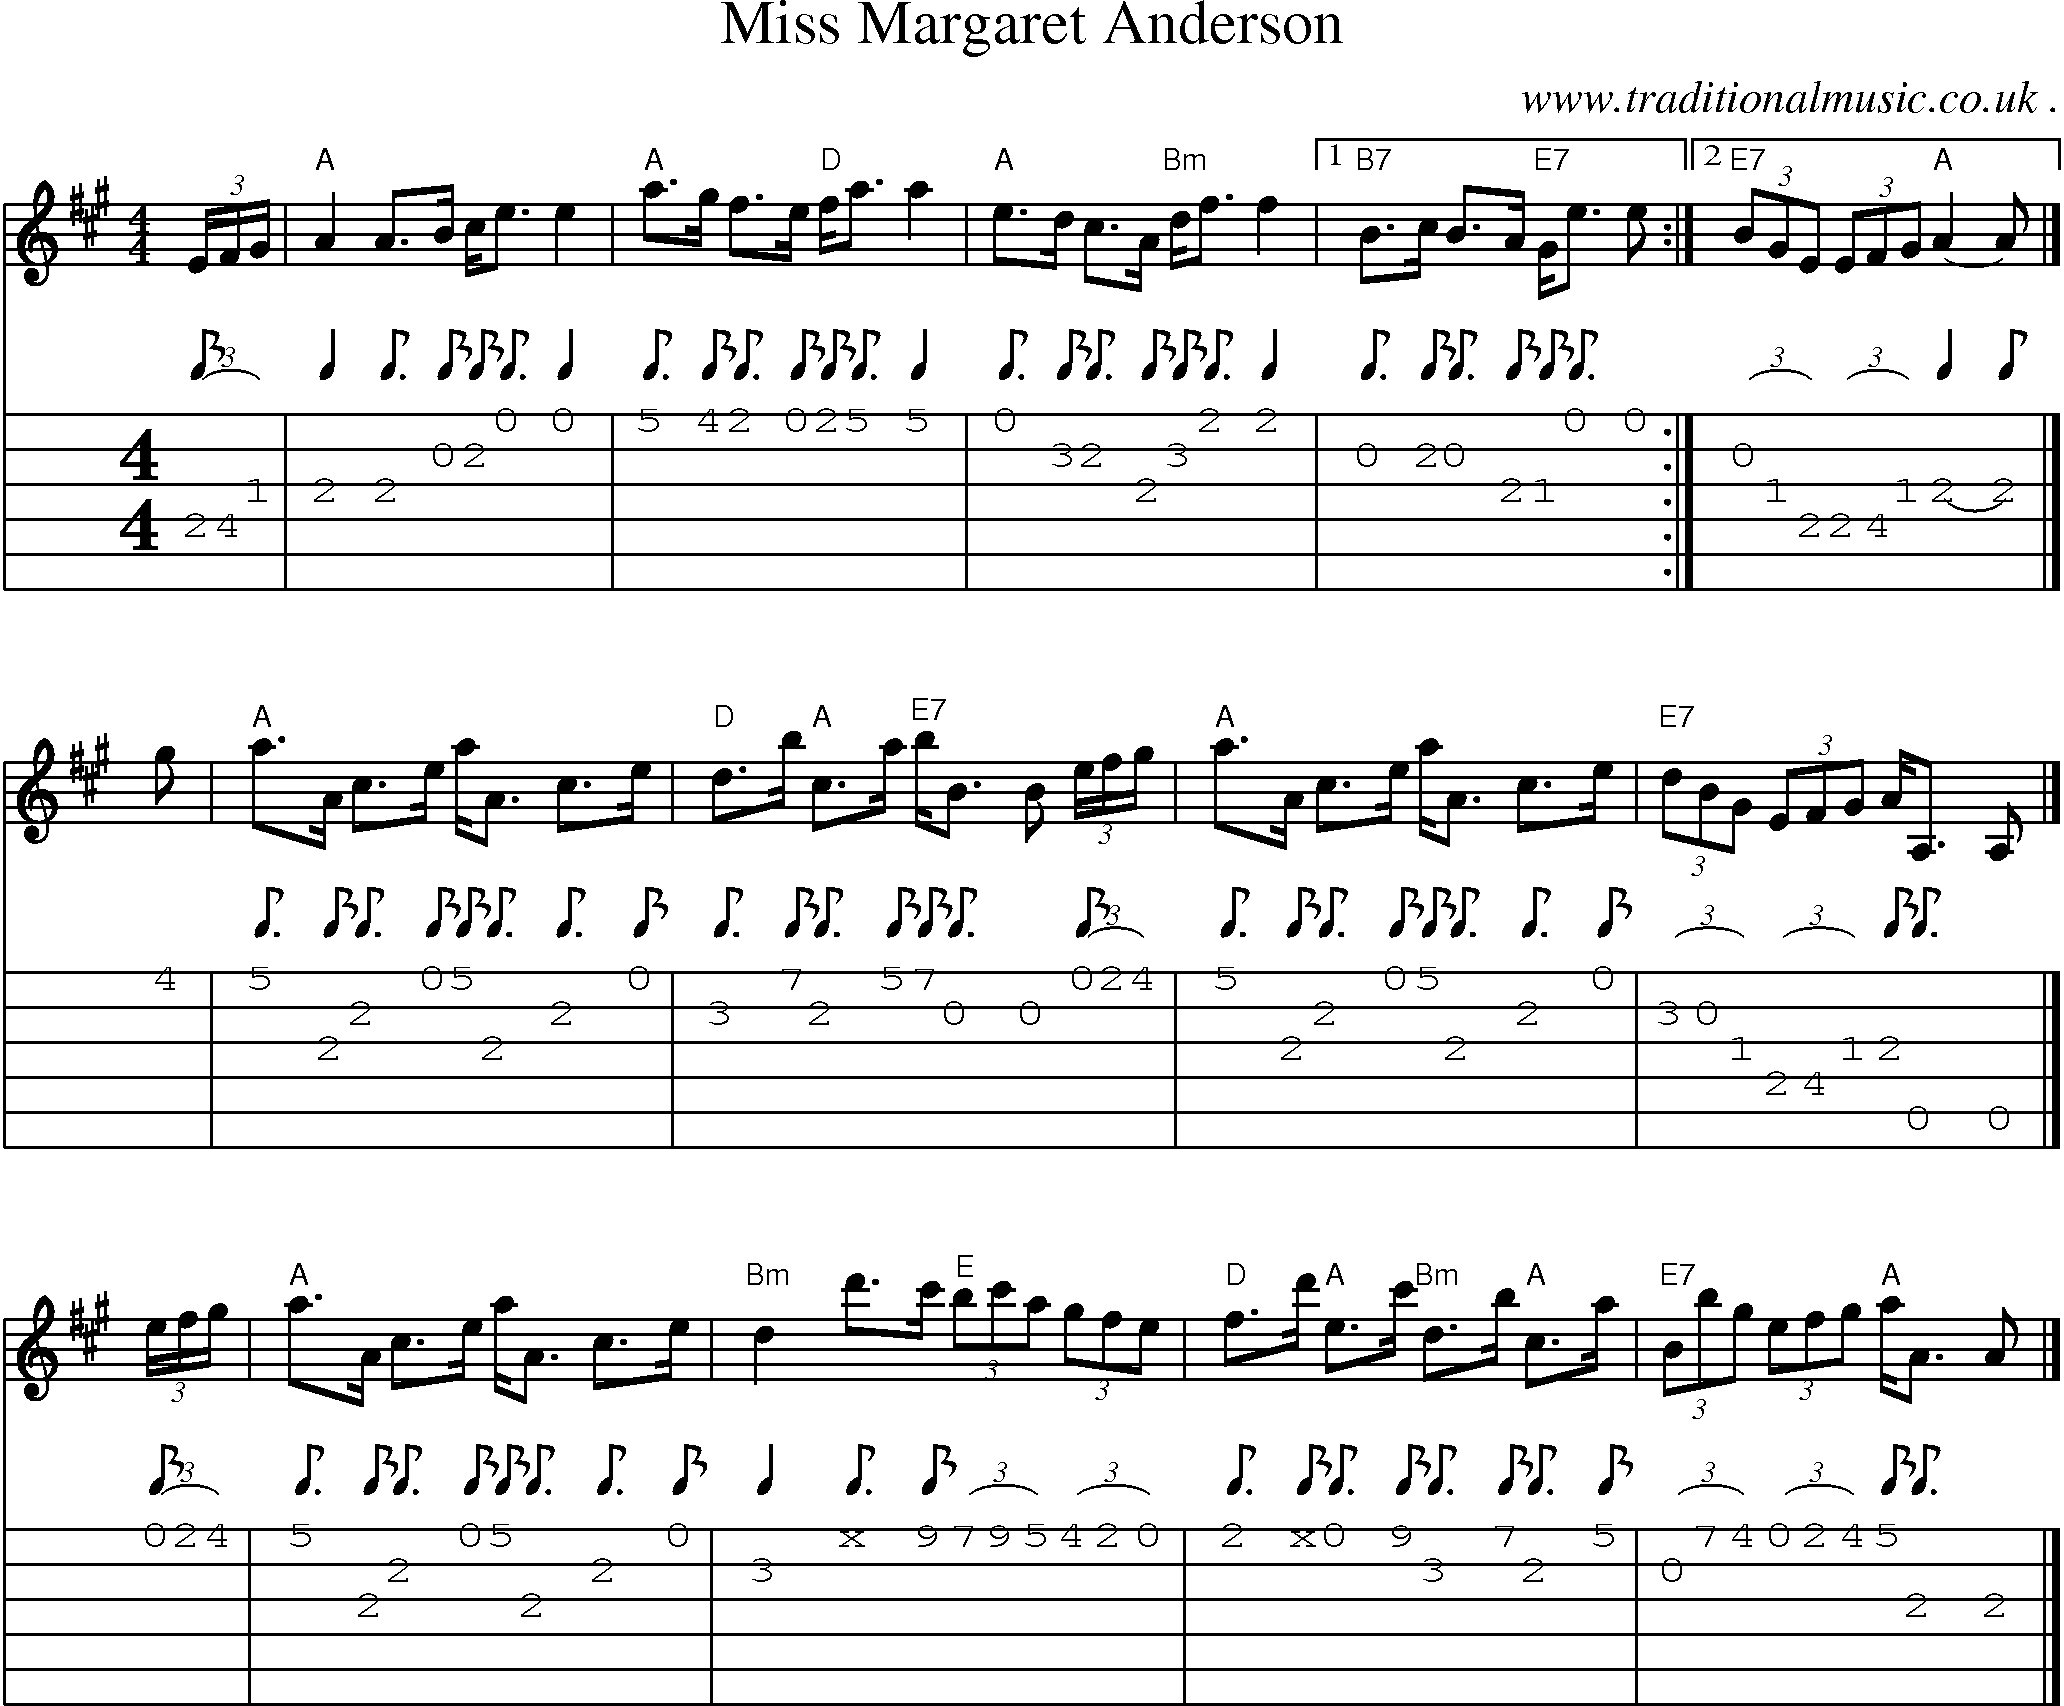 Sheet-music  score, Chords and Guitar Tabs for Miss Margaret Anderson